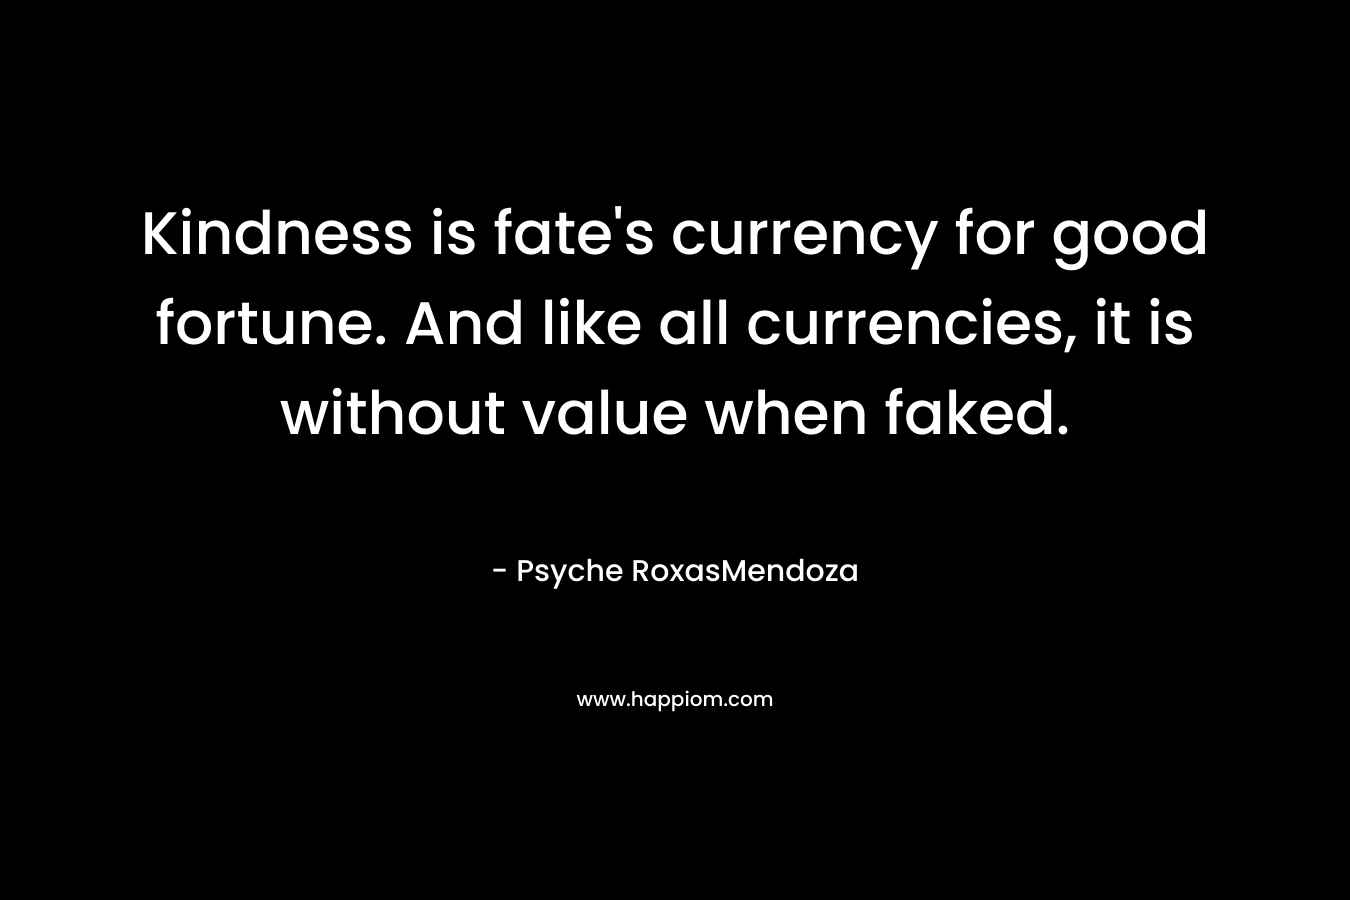 Kindness is fate’s currency for good fortune. And like all currencies, it is without value when faked. – Psyche RoxasMendoza